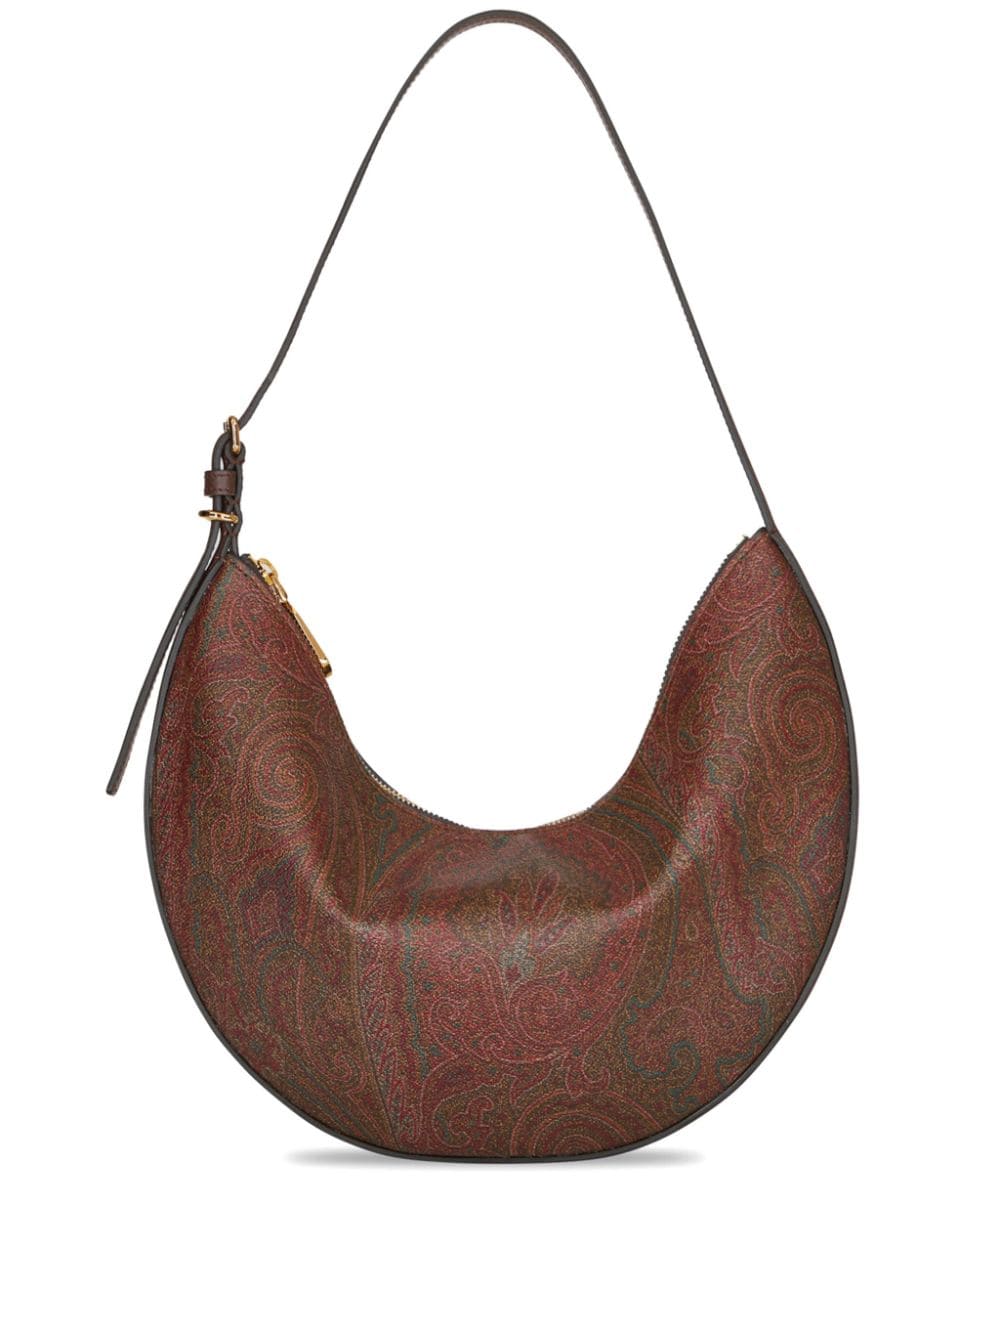 ETRO Brown Paisley Print Leather Hobo Shoulder Bag for Women